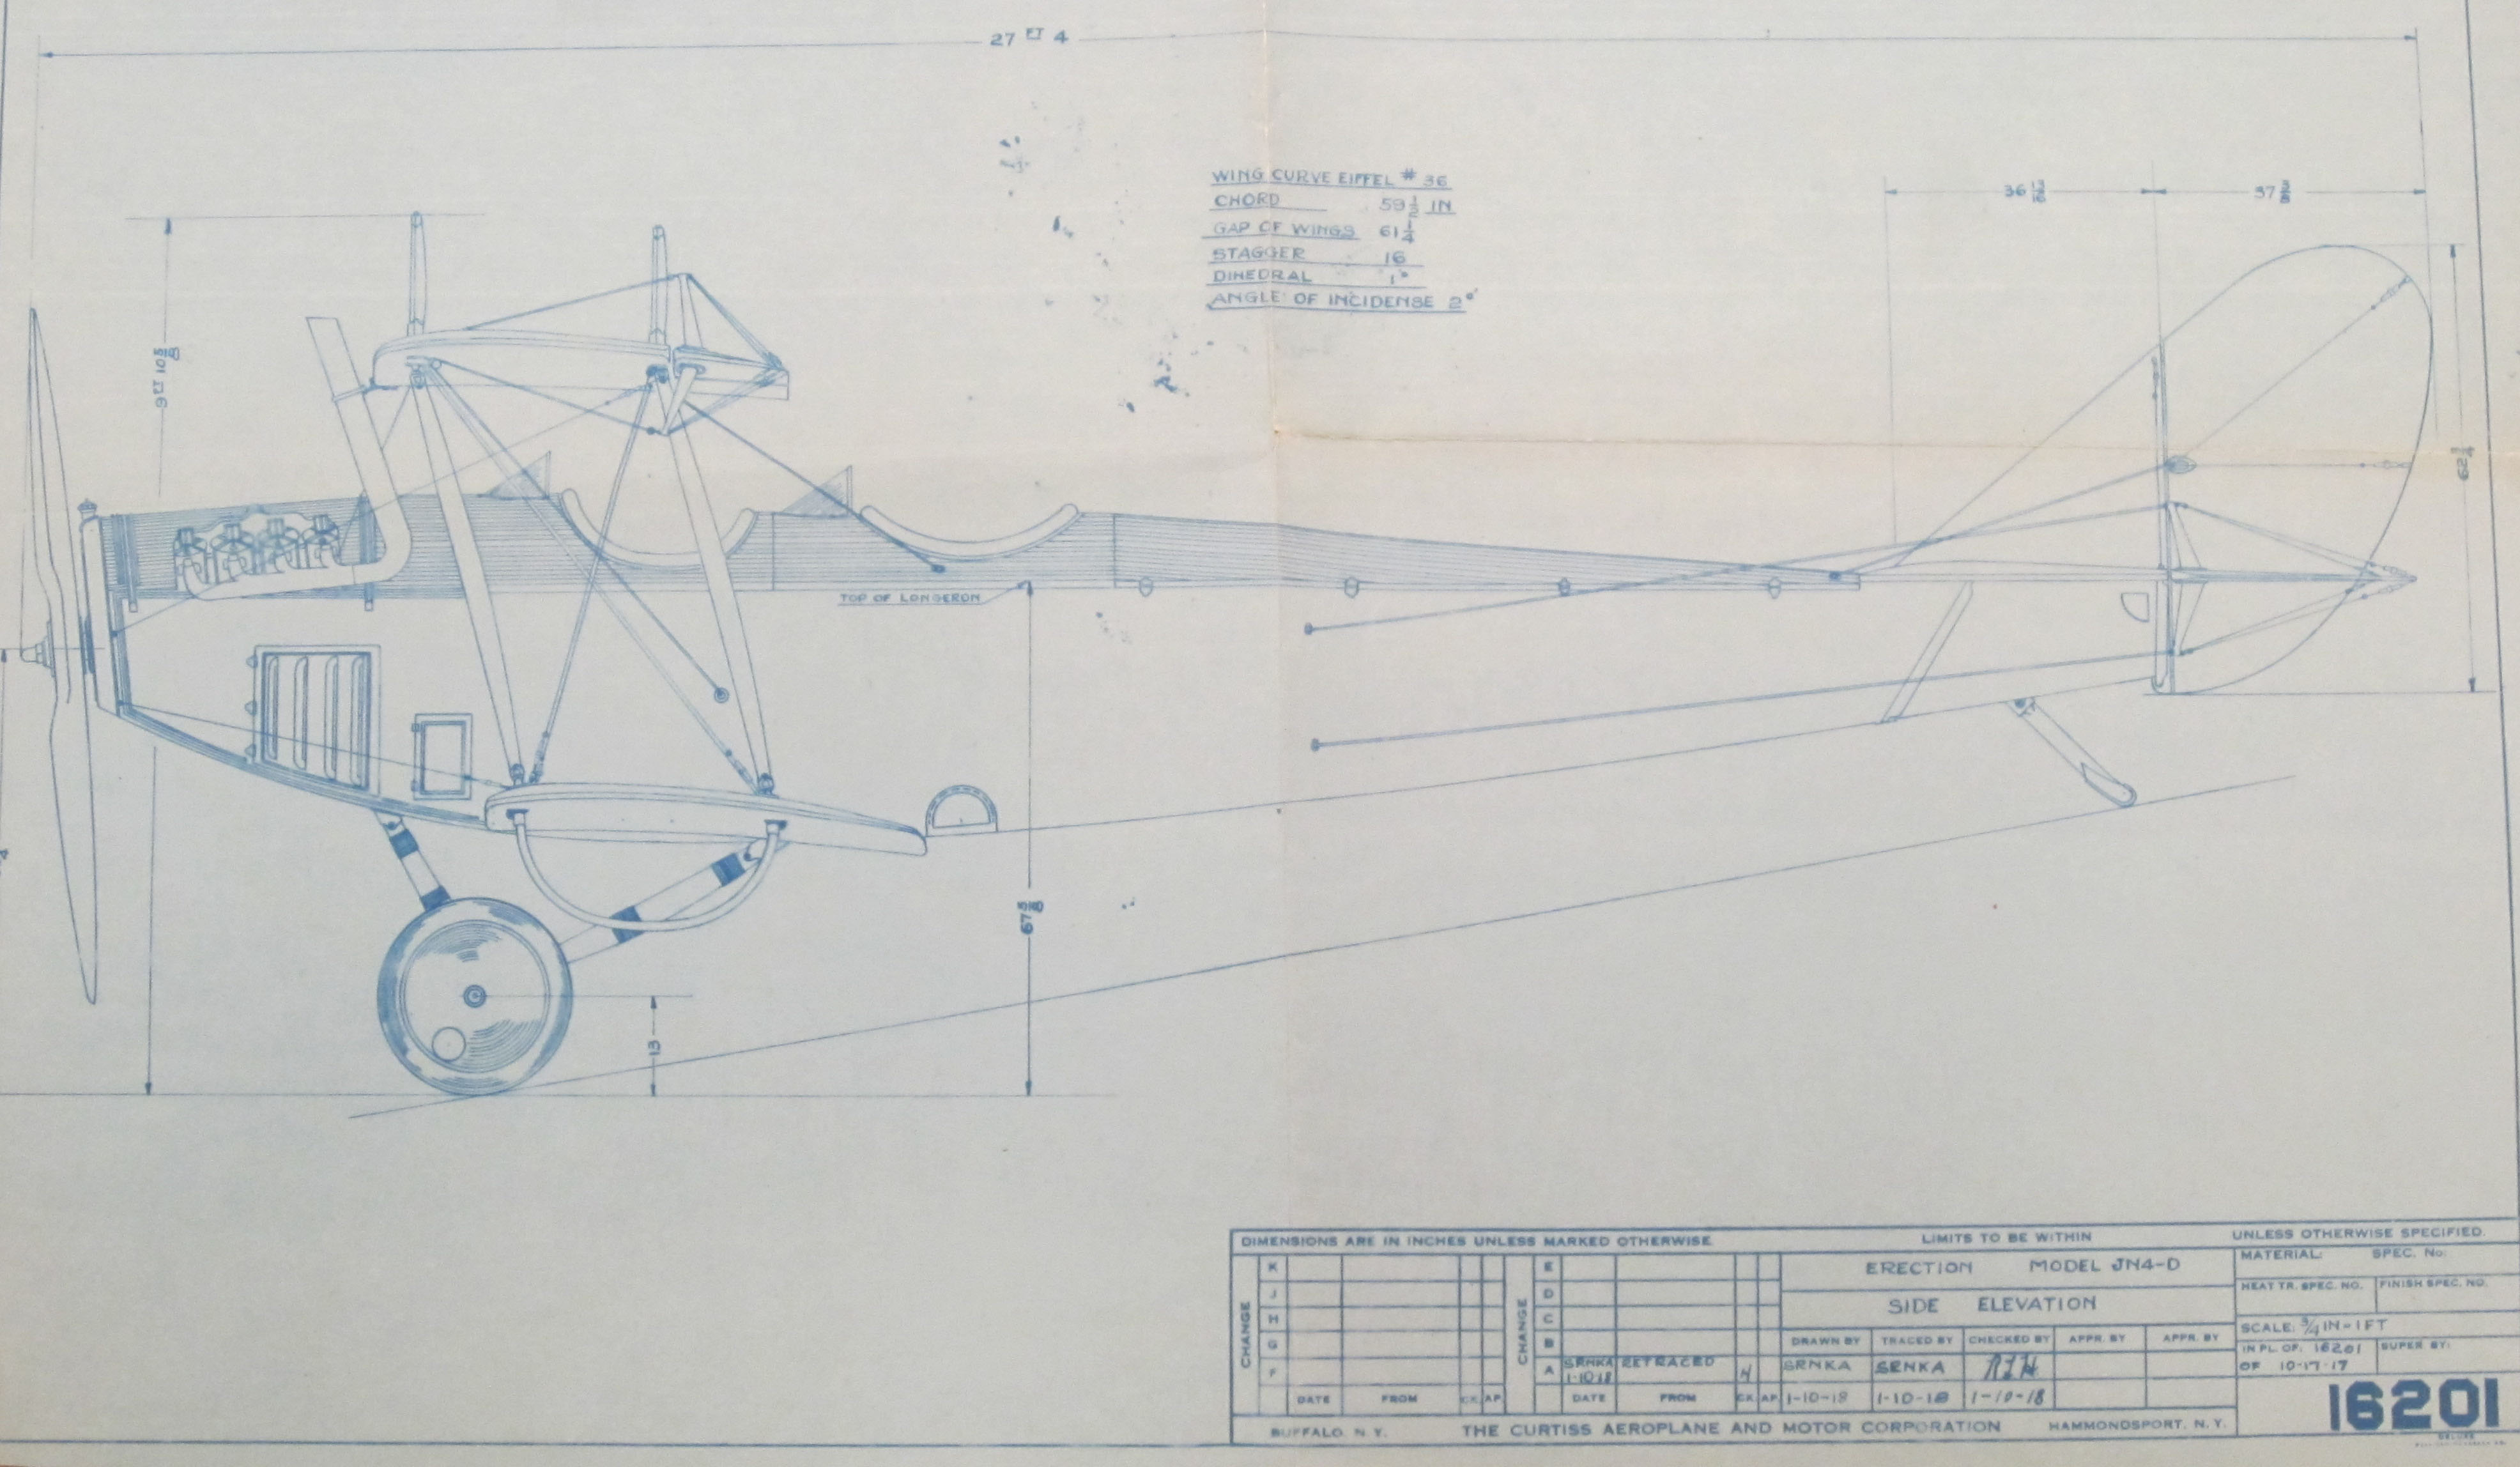 Blueprint of the side elevation for the model J-N-4-D airplane, built by the Curtiss Aeroplane Company of Hammondsport, N.Y., later the Curtiss Aeroplane and Motor Company, 1917-1918. (MSS 10875-bv. Photograph by Petrina Jackson)